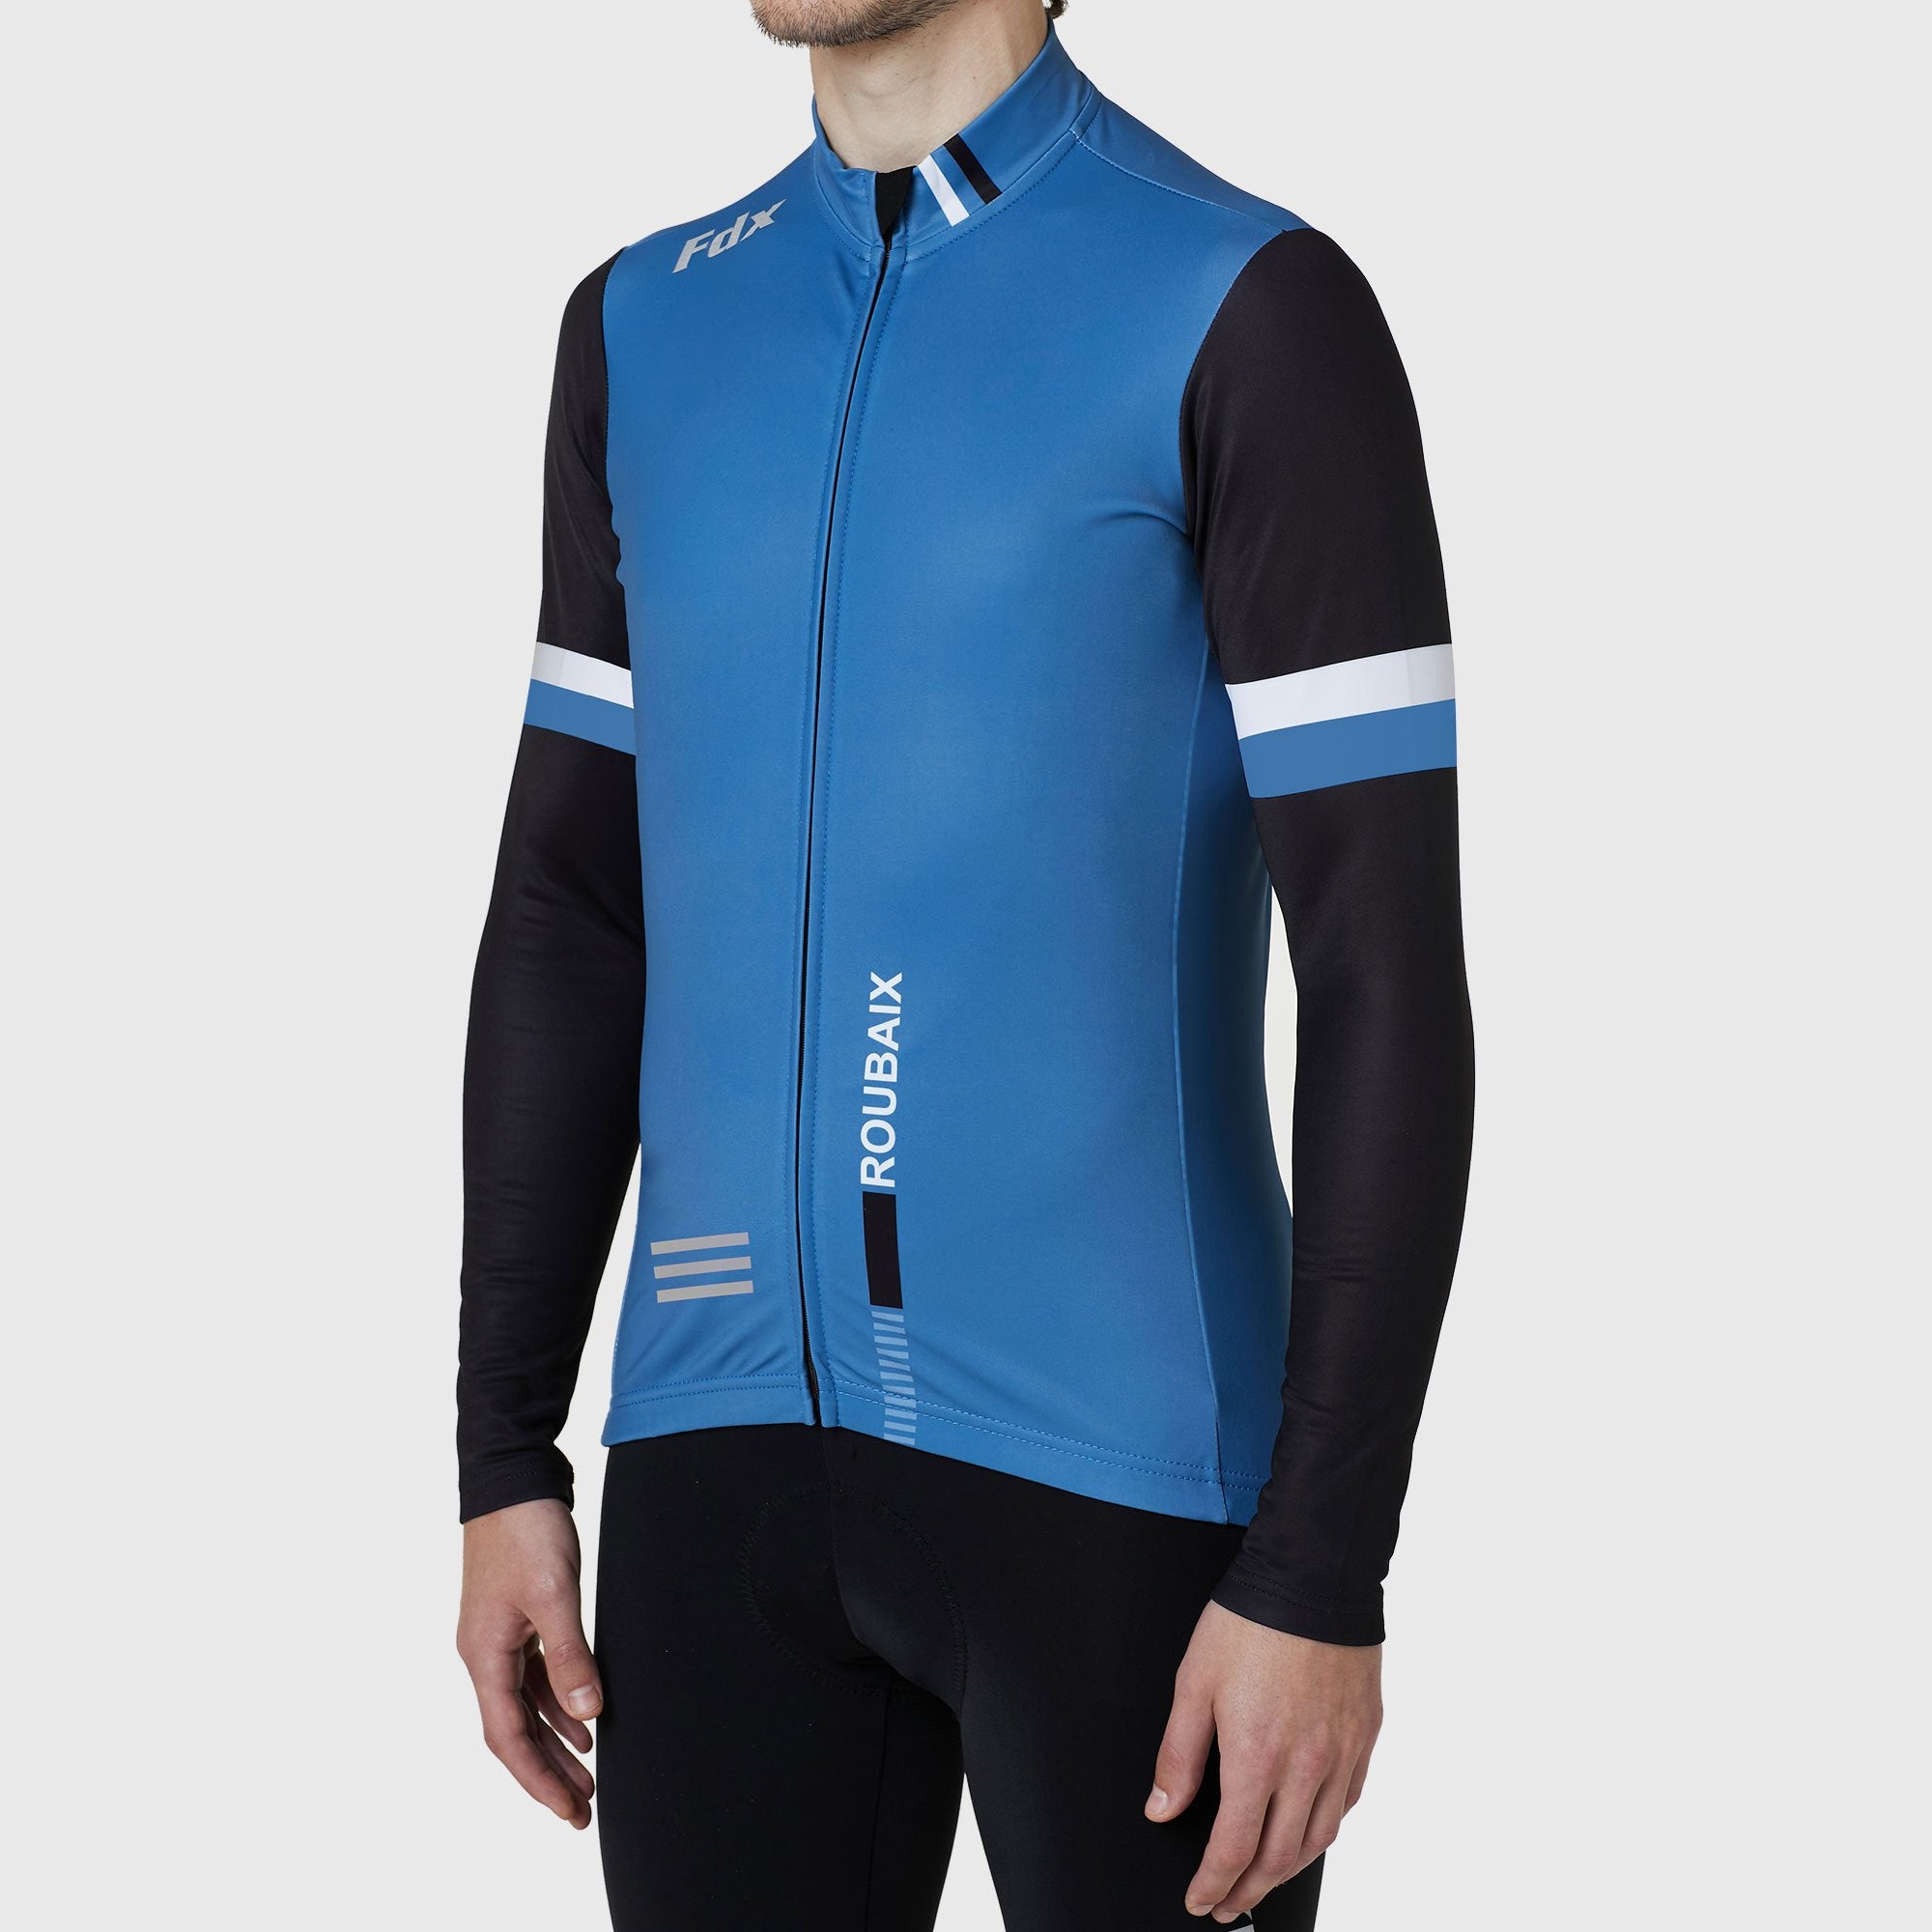 Fdx Limited Edition Blue Men\'s Jersey Sports - Long Thermal US Sports® Sleeve FDX FDX | Cycling